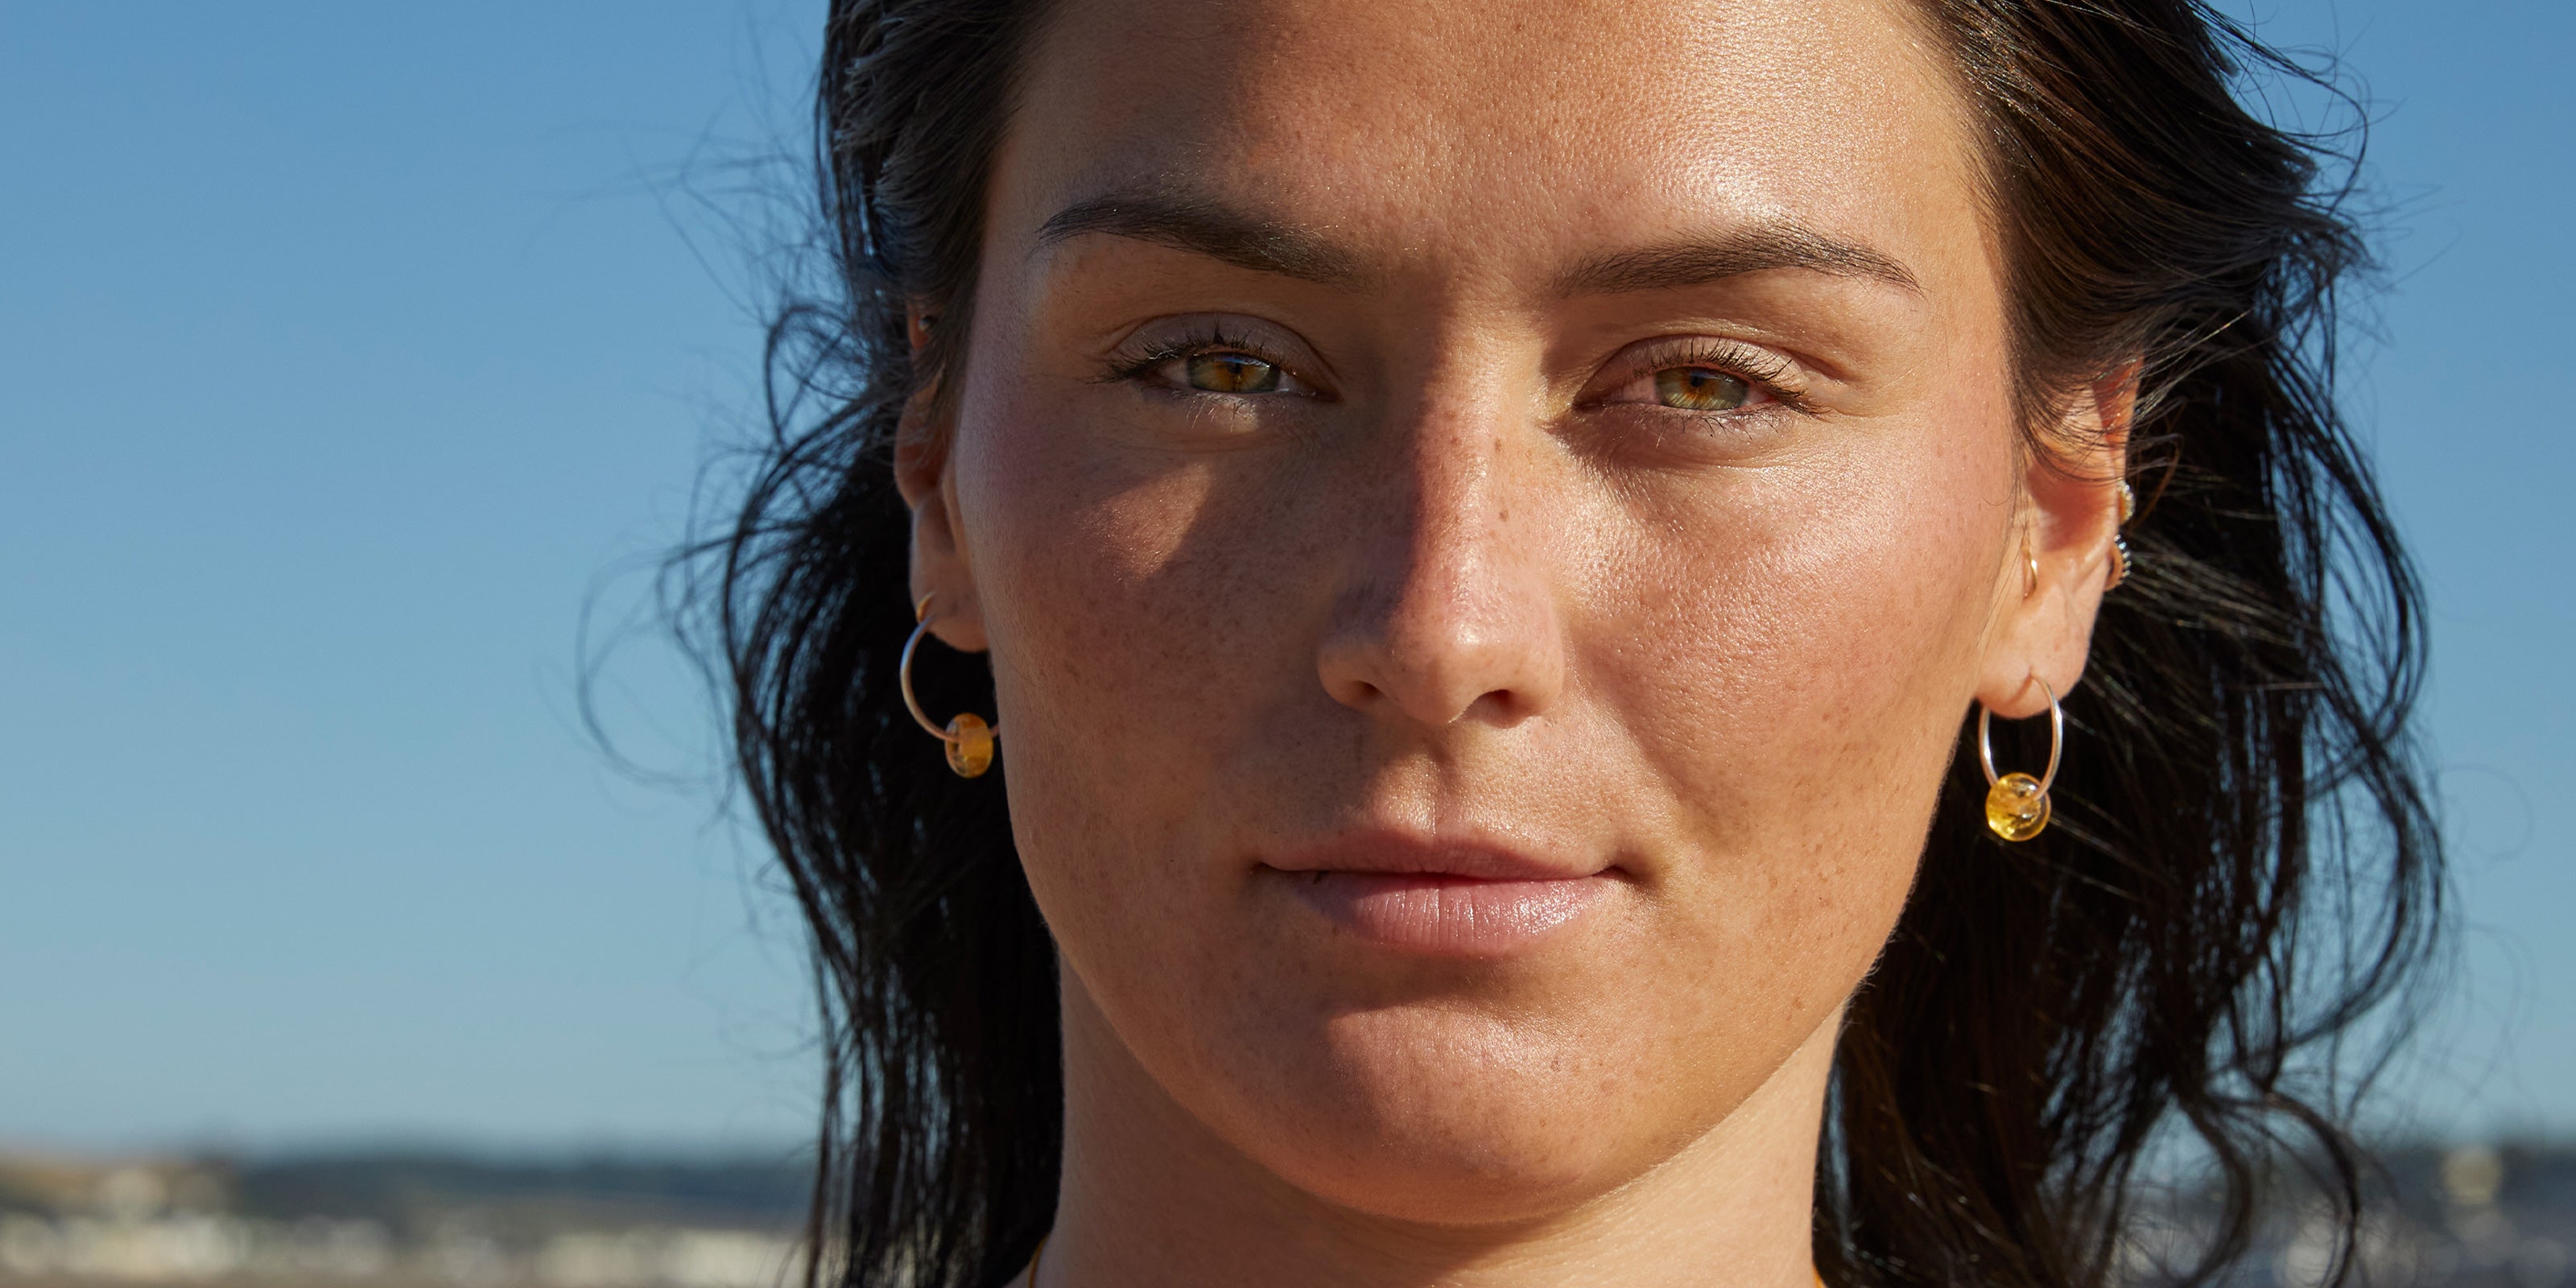 Girl wearing amber glass beads on sterling silver hoop earrings at the beach Crow Point.